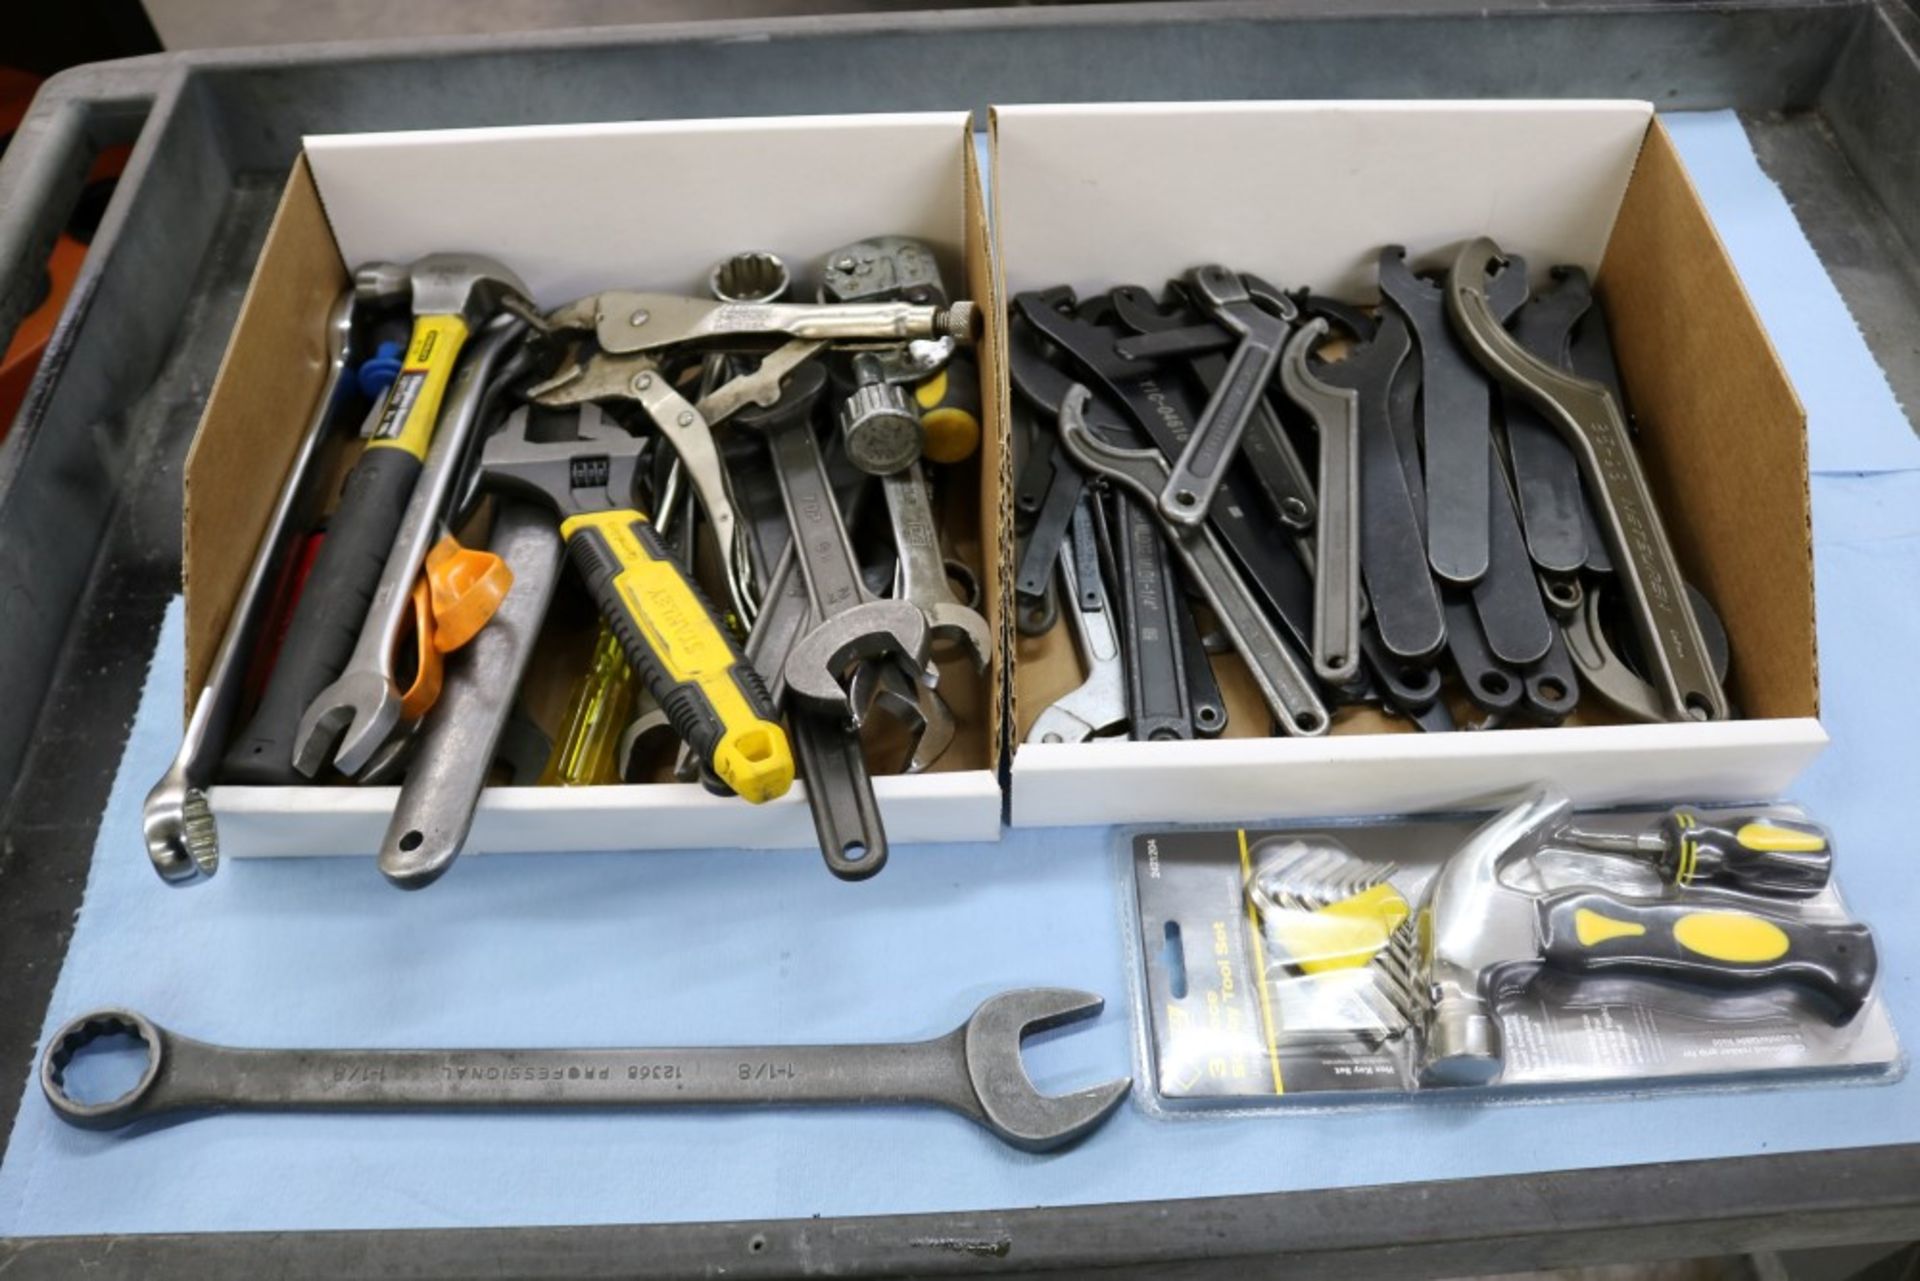 2 Boxes of Various Wrenches, Hammers, ER-32 Wrenches, CAT 40 Wrenches and Others - Image 4 of 5